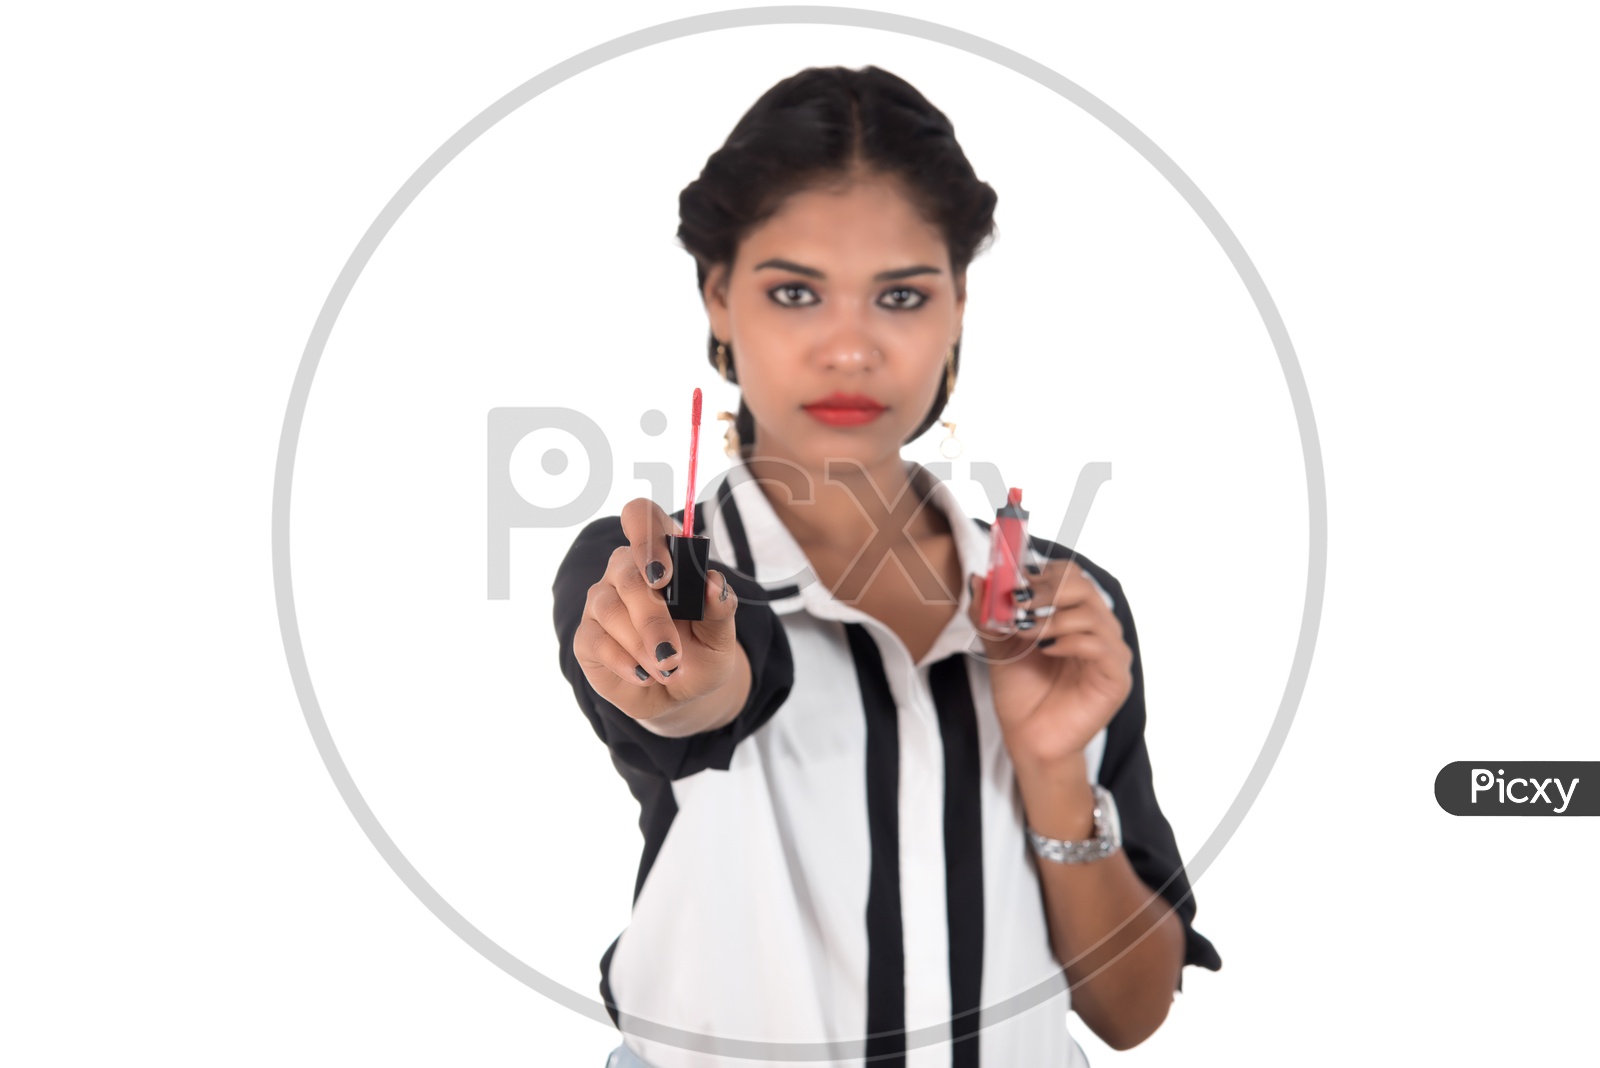 Young Indian Girl Showing Lipstick And Posing on an Isolated White Background